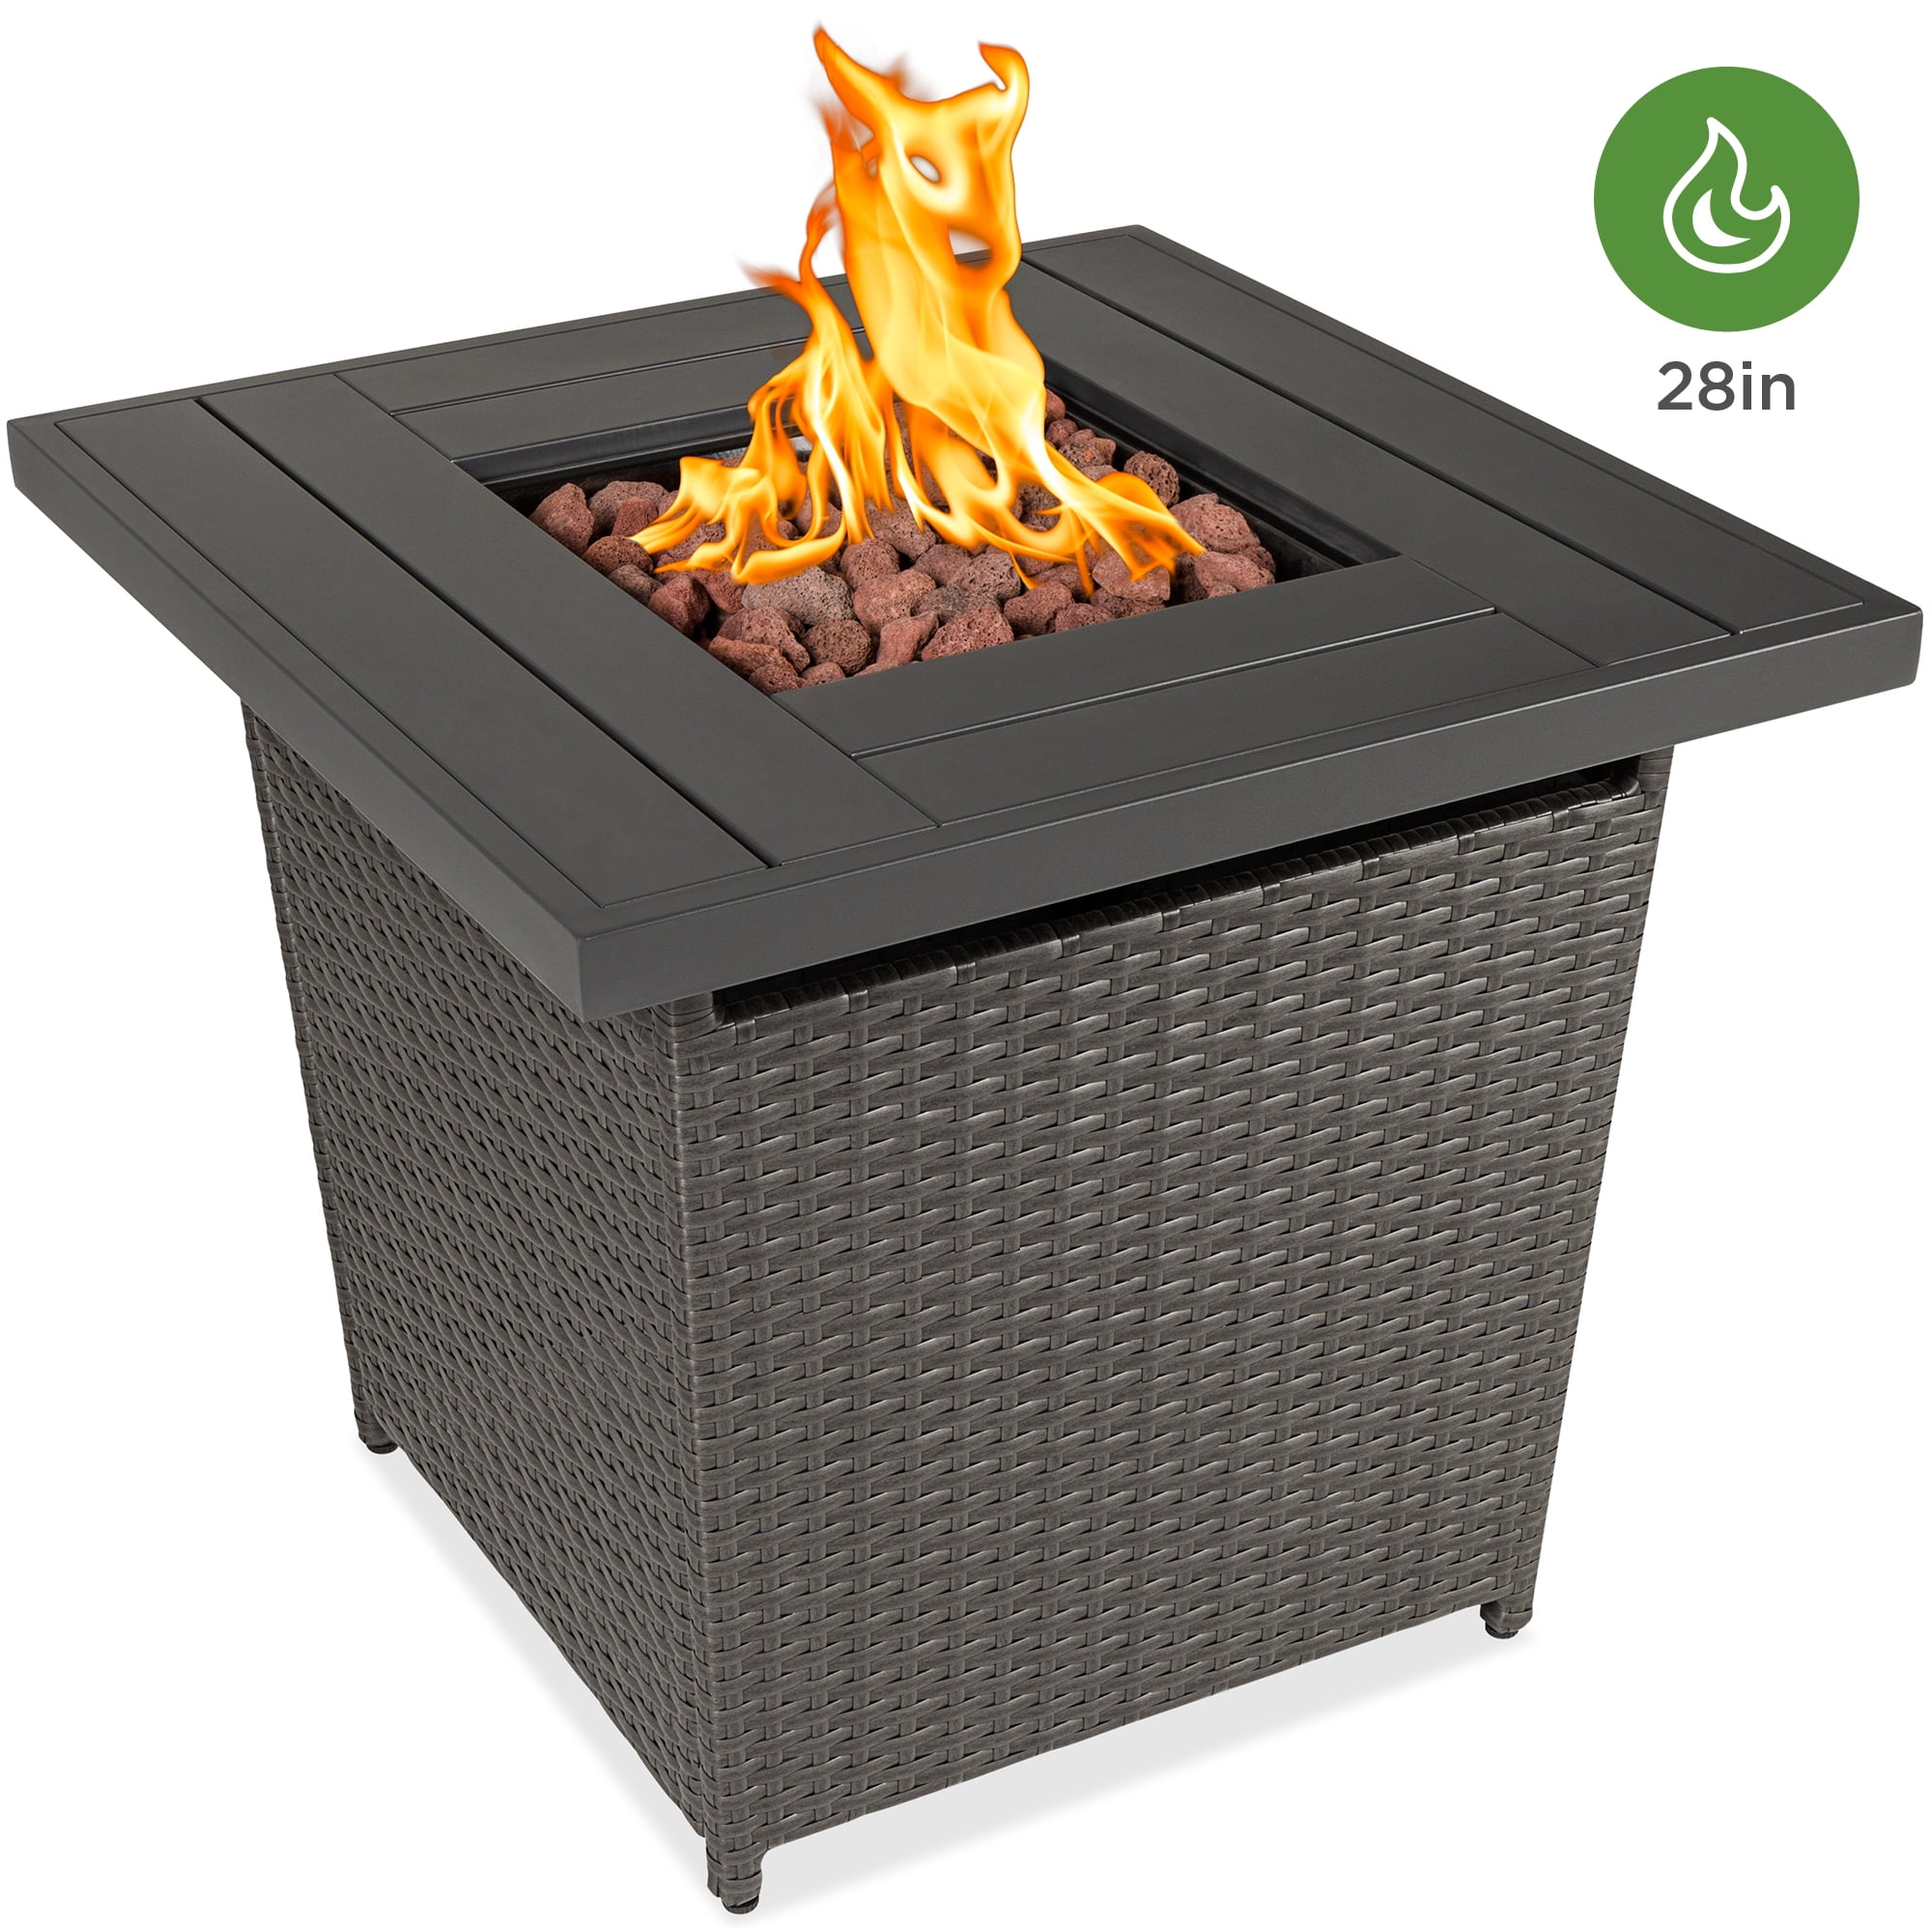 Best Choice Products 28in Fire Pit Table 50,000 BTU Outdoor Wicker Lava Rock Table Top Fire Pit